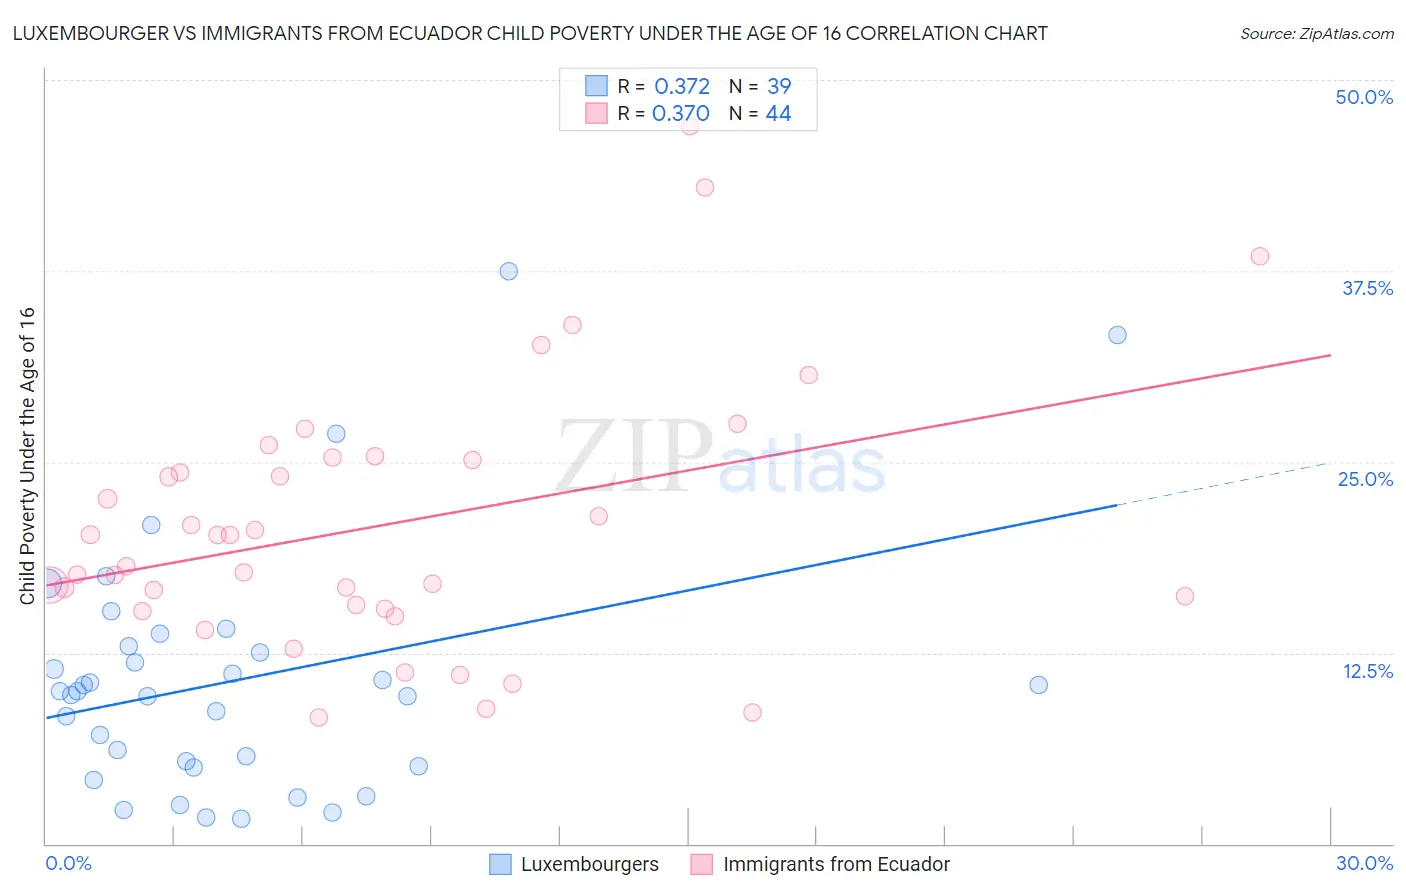 Luxembourger vs Immigrants from Ecuador Child Poverty Under the Age of 16